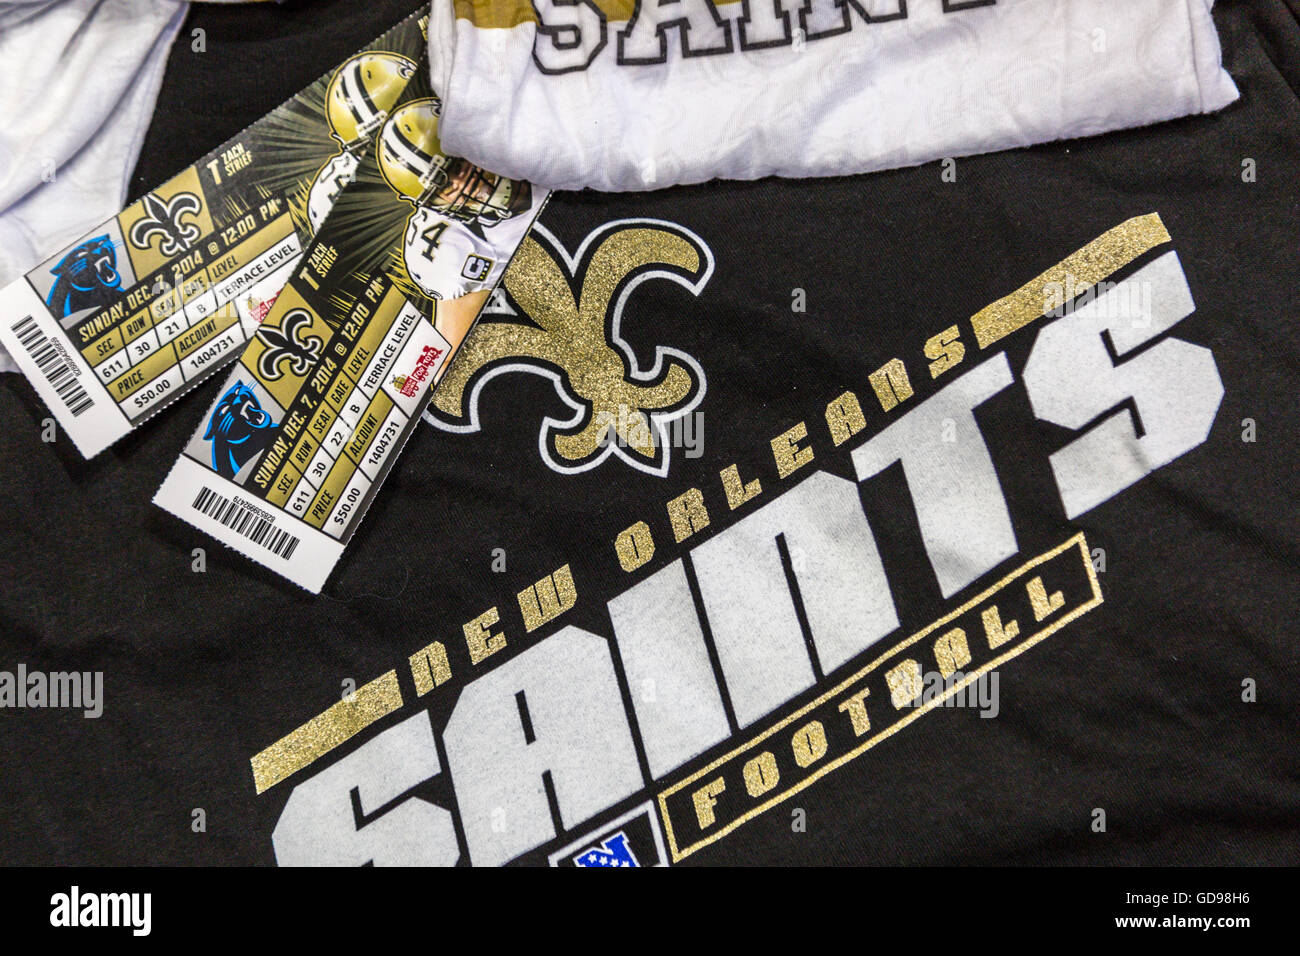 Tickets, shirts and logos for the New Orleans Saints American football team Stock Photo